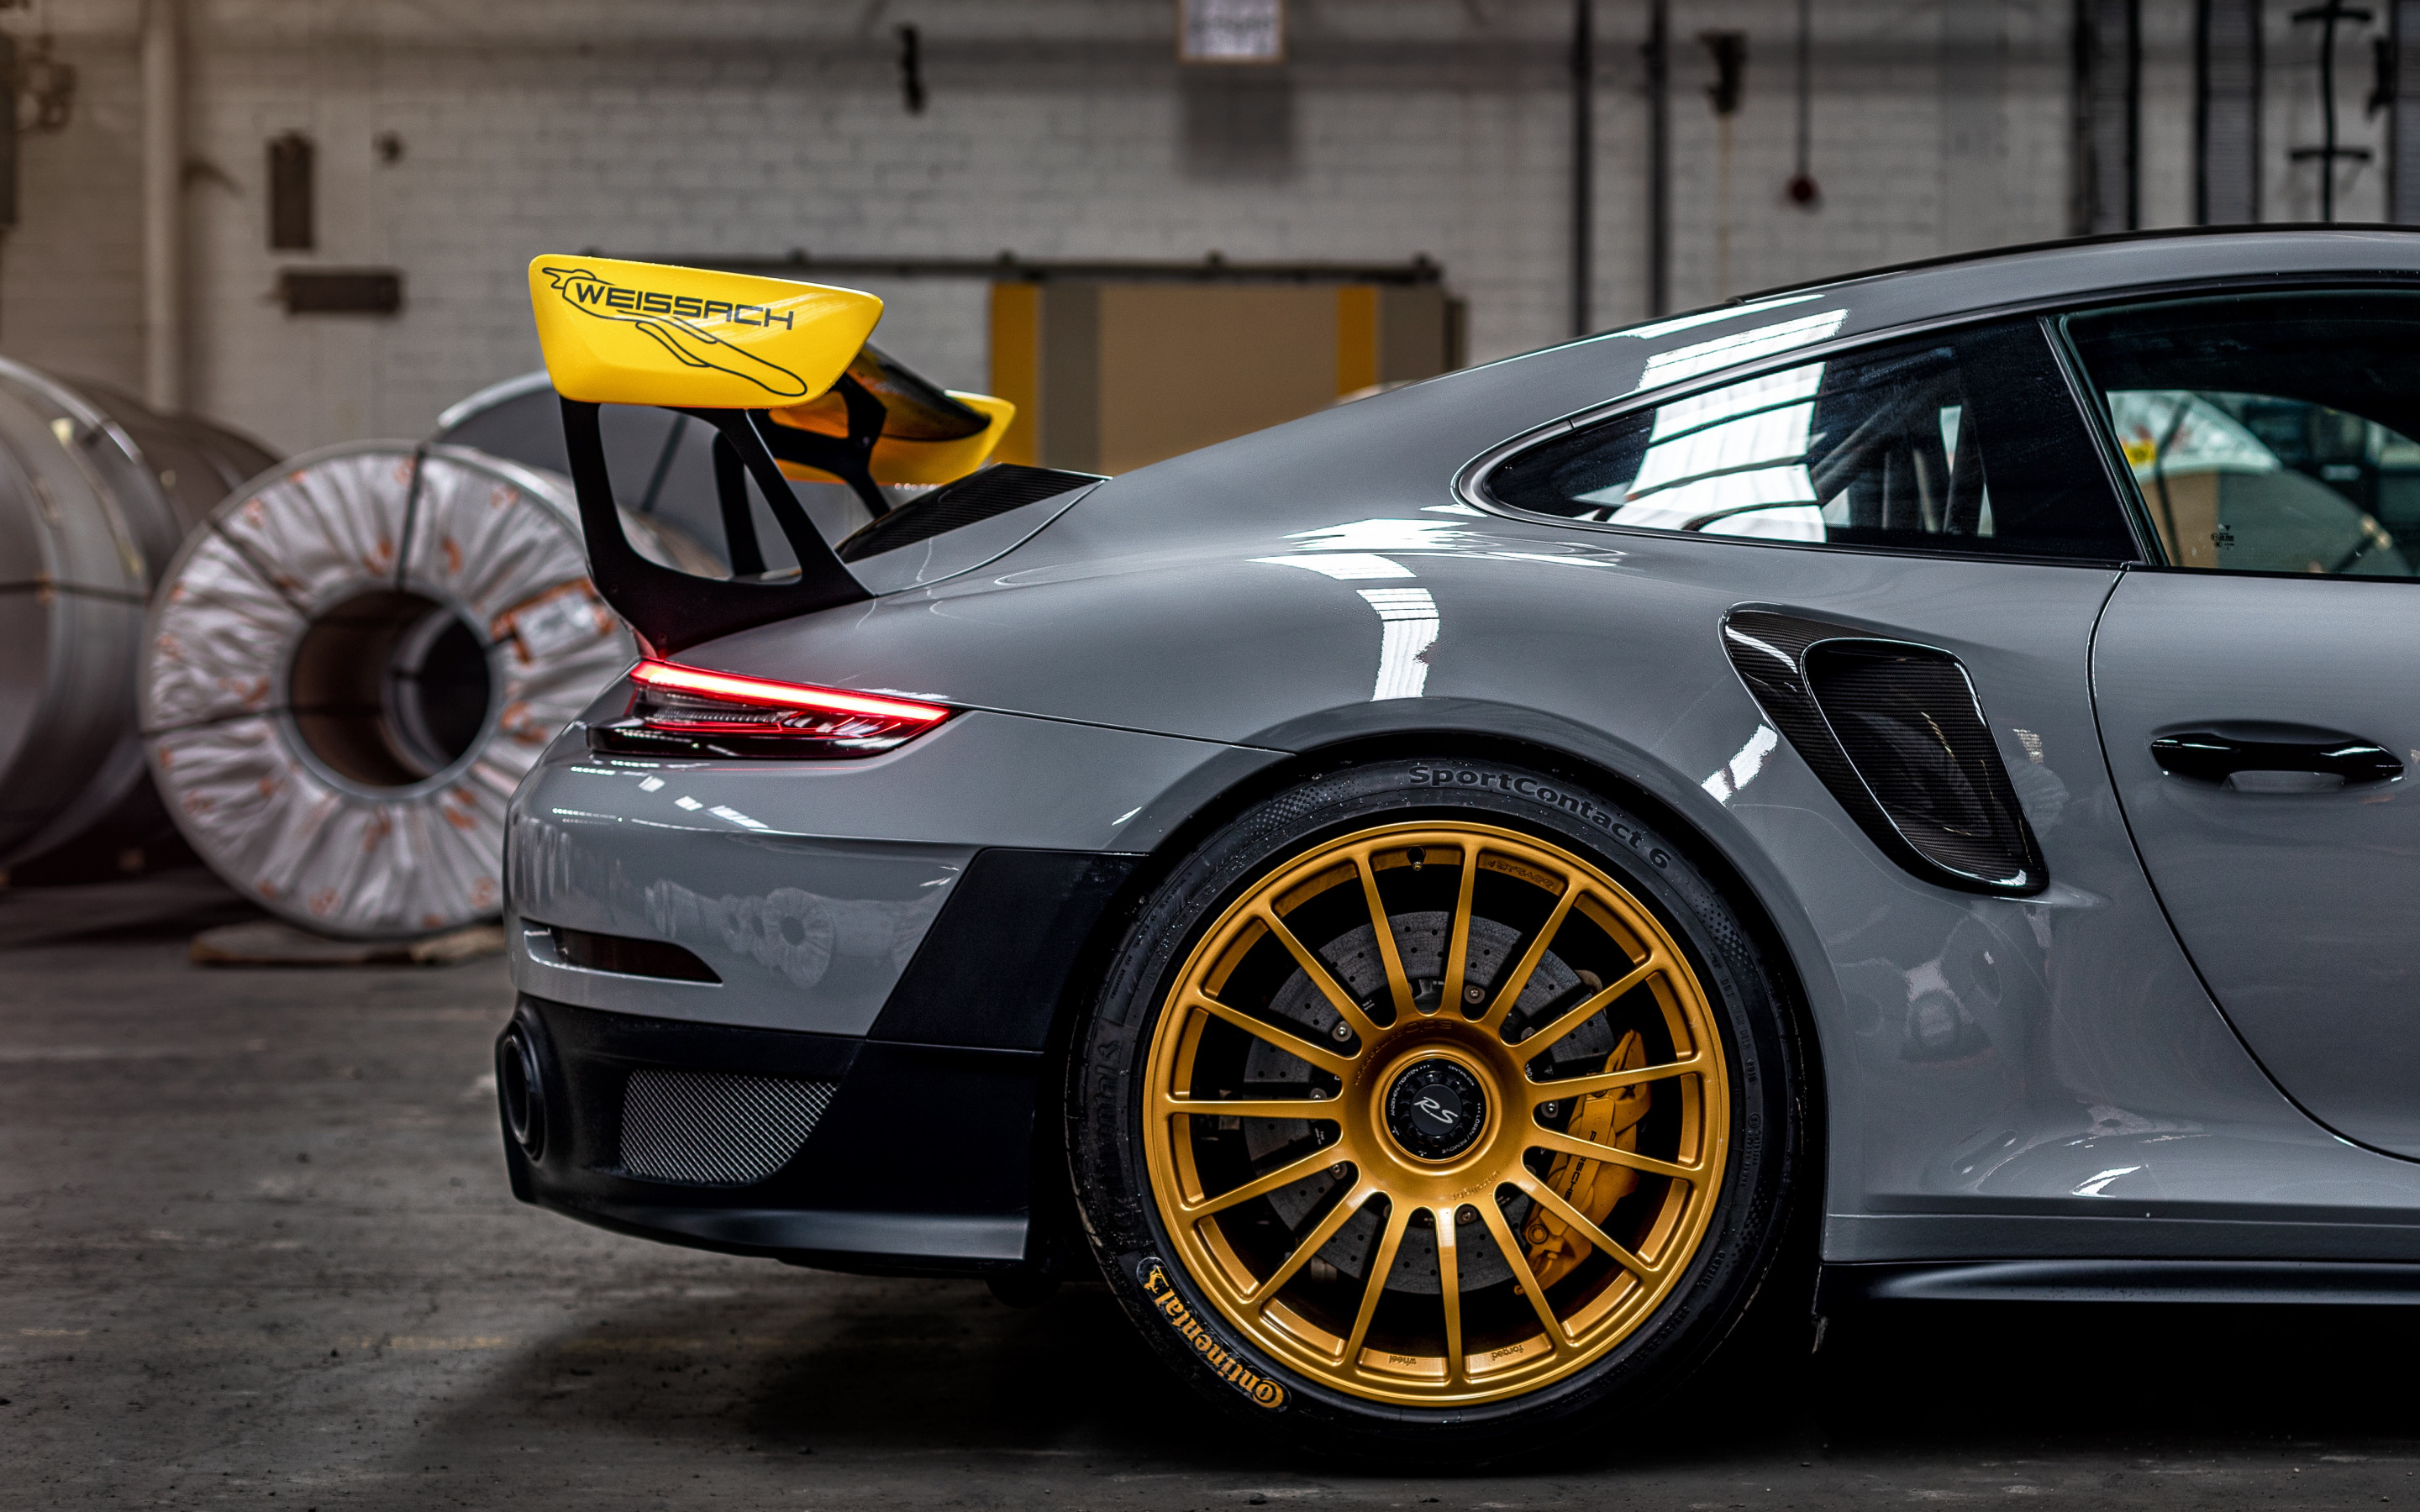 2019 Porsche 911 GT2 RS Vehicle Car Grey Cars Colored Wheels Spoilers 2880x1800